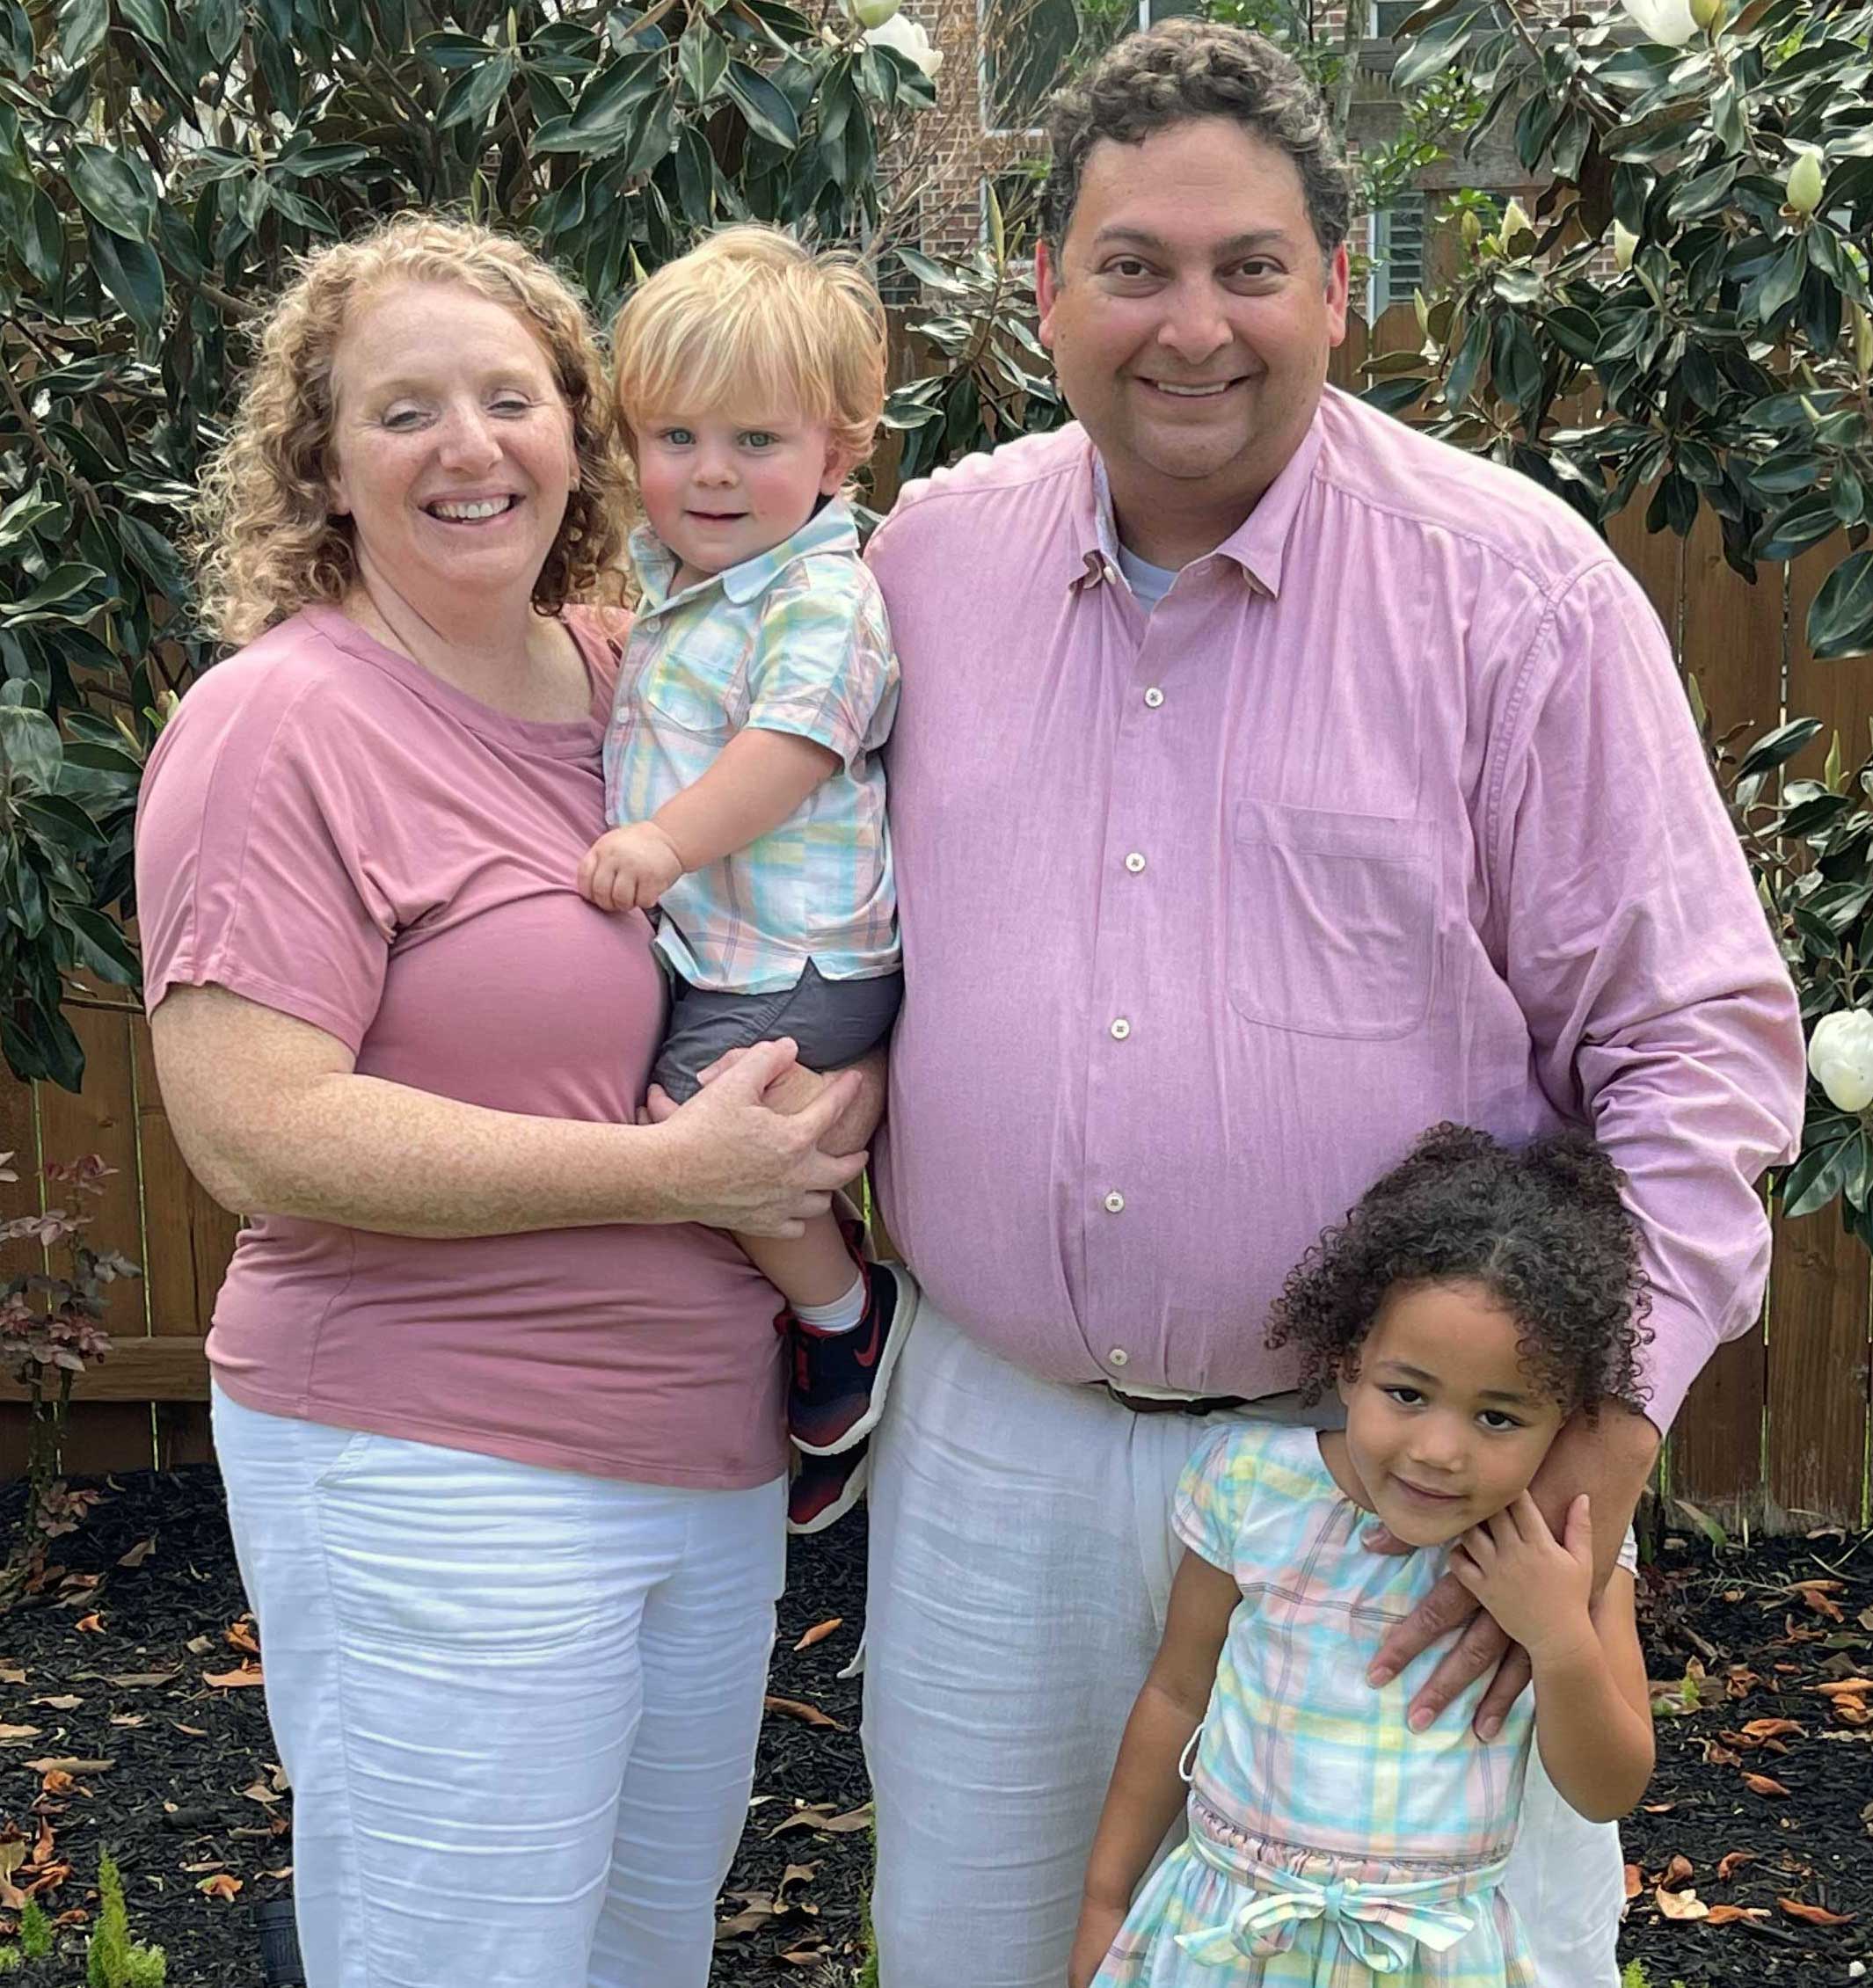 Dr Malmberg with partner and their two children